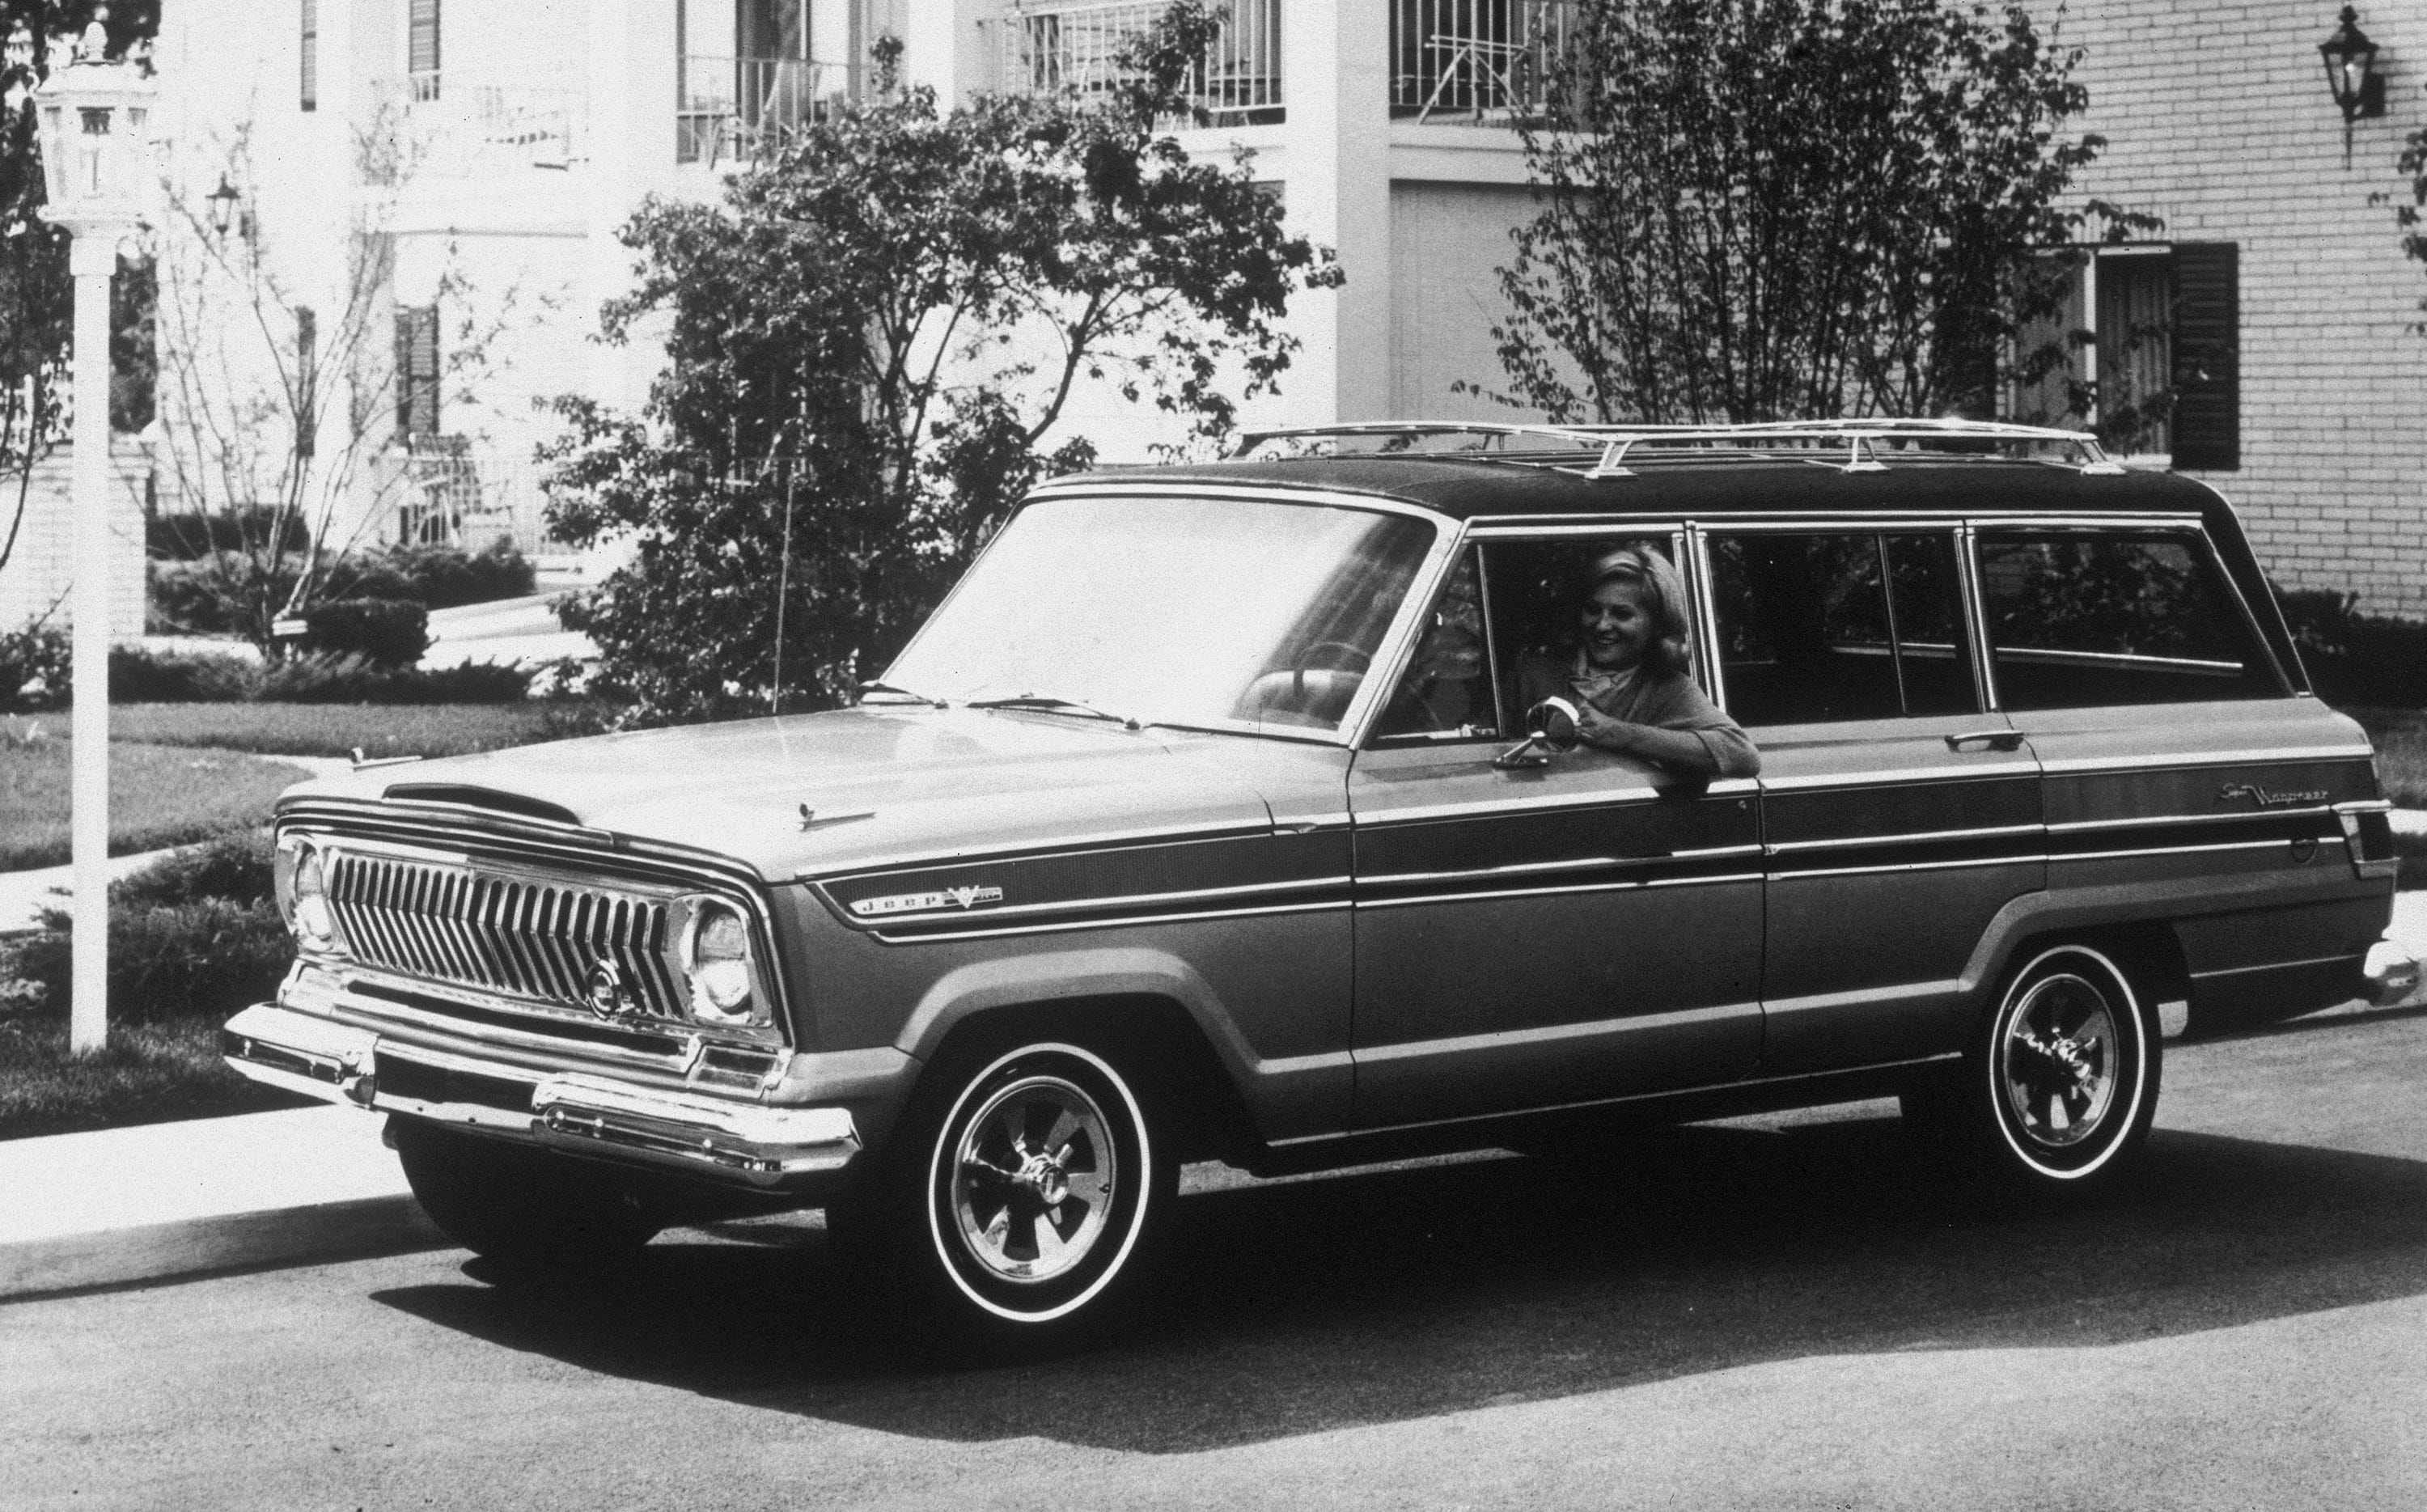 1963-1983 Jeep Wagoneer: The 1963 Jeep Wagoneer was the first four-wheel-drive vehicle mated with an automatic transmission, pioneering the first modern SUV. An independent front suspension was optional. Quadra-Trac, the first automatic full-time four-wheel-drive system, was introduced in 1973 and available in full-size Jeep trucks and wagons.